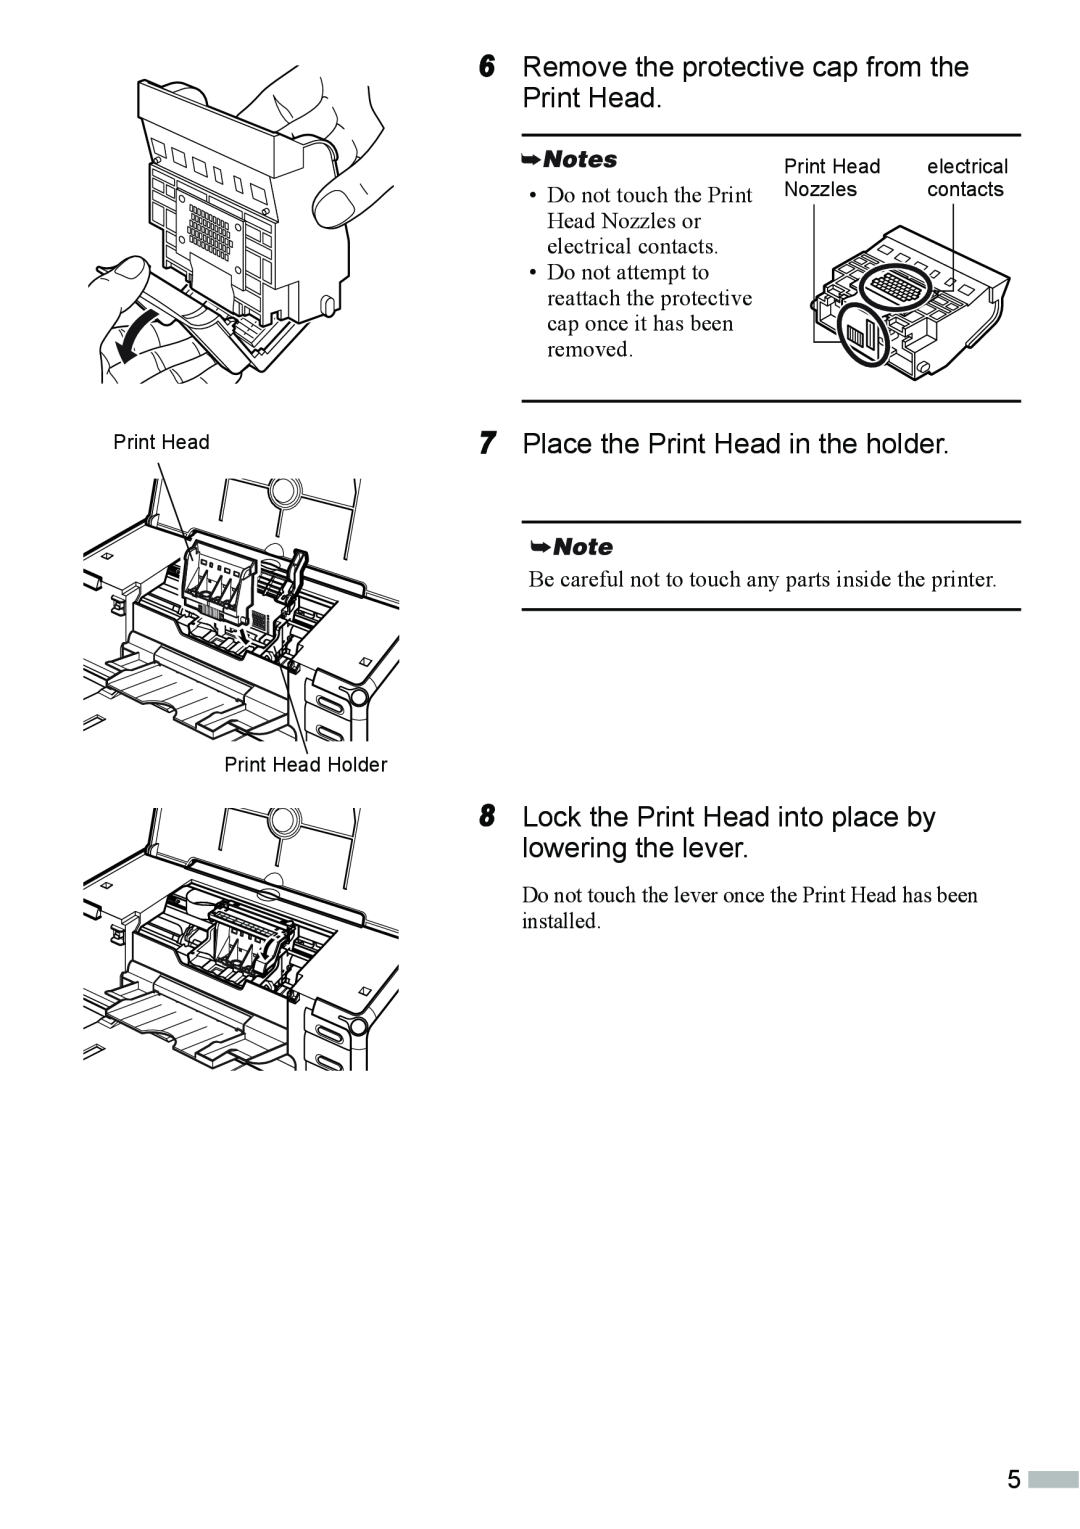 Canon IP4000 6Remove the protective cap from the Print Head, 7Place the Print Head in the holder, Nozzles, contacts 